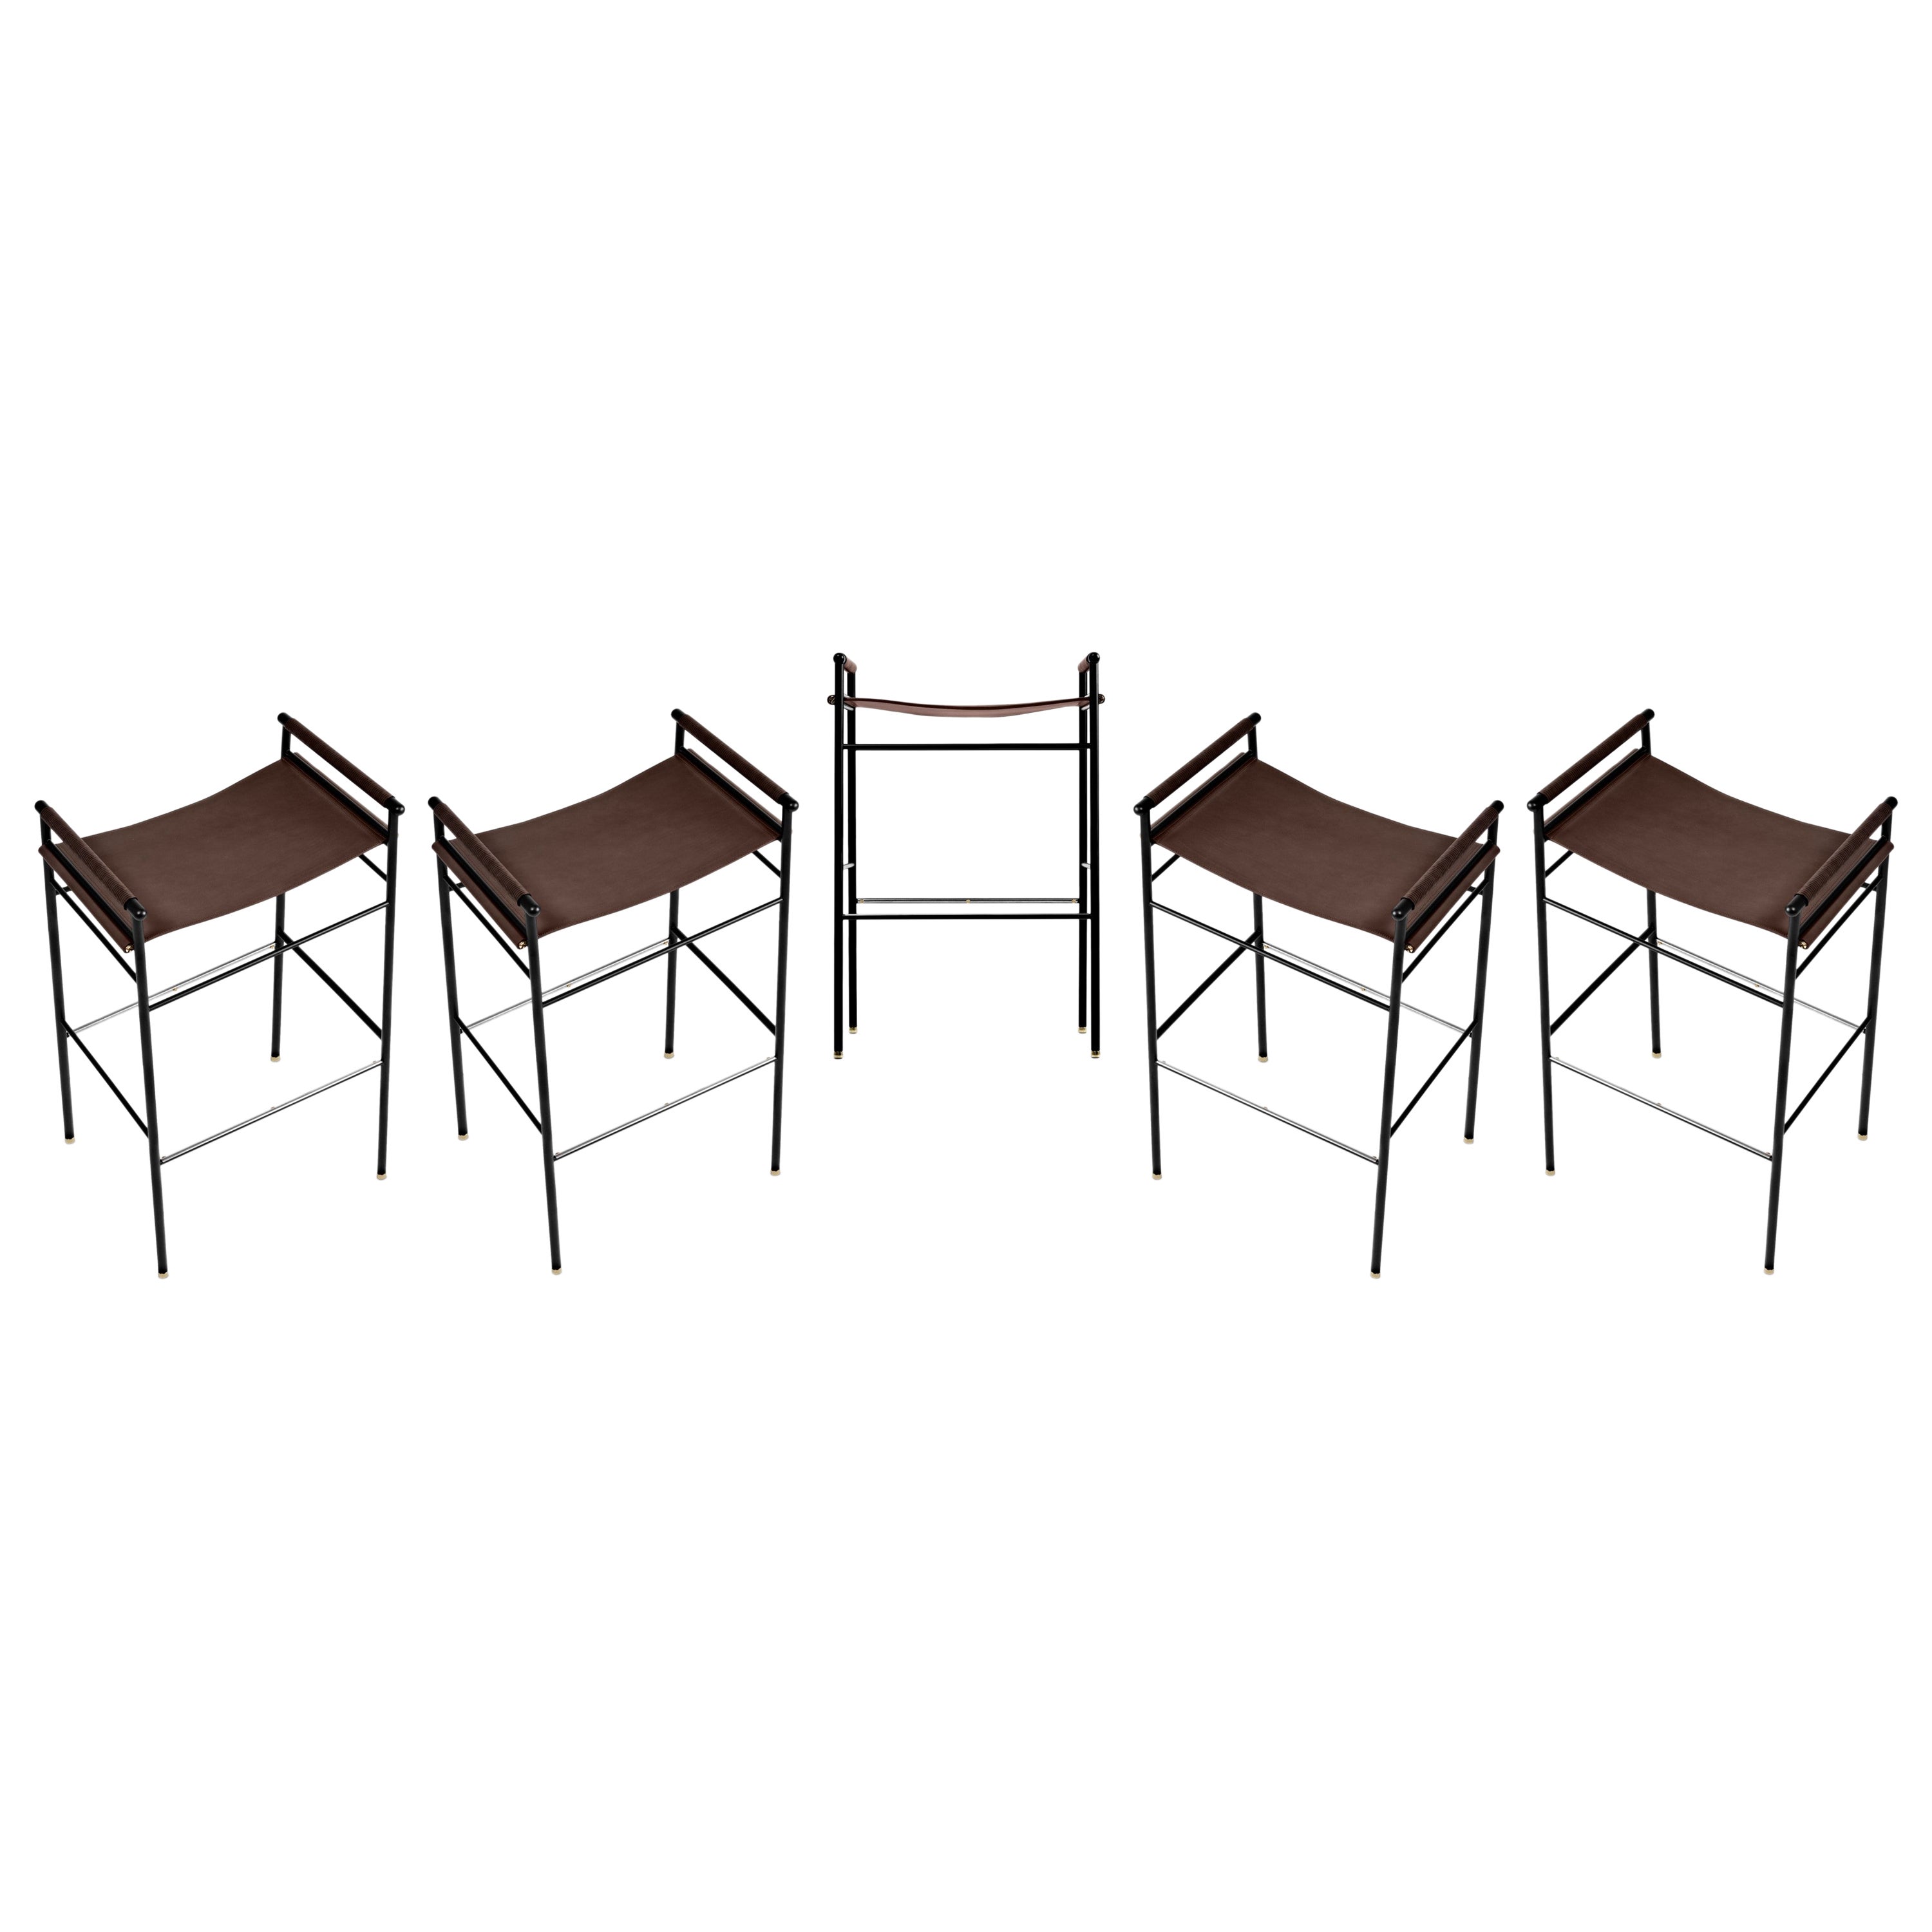 Set of 5 Contemporary Classic Bar Stool Dark Brown Leather Black Rubber Metal